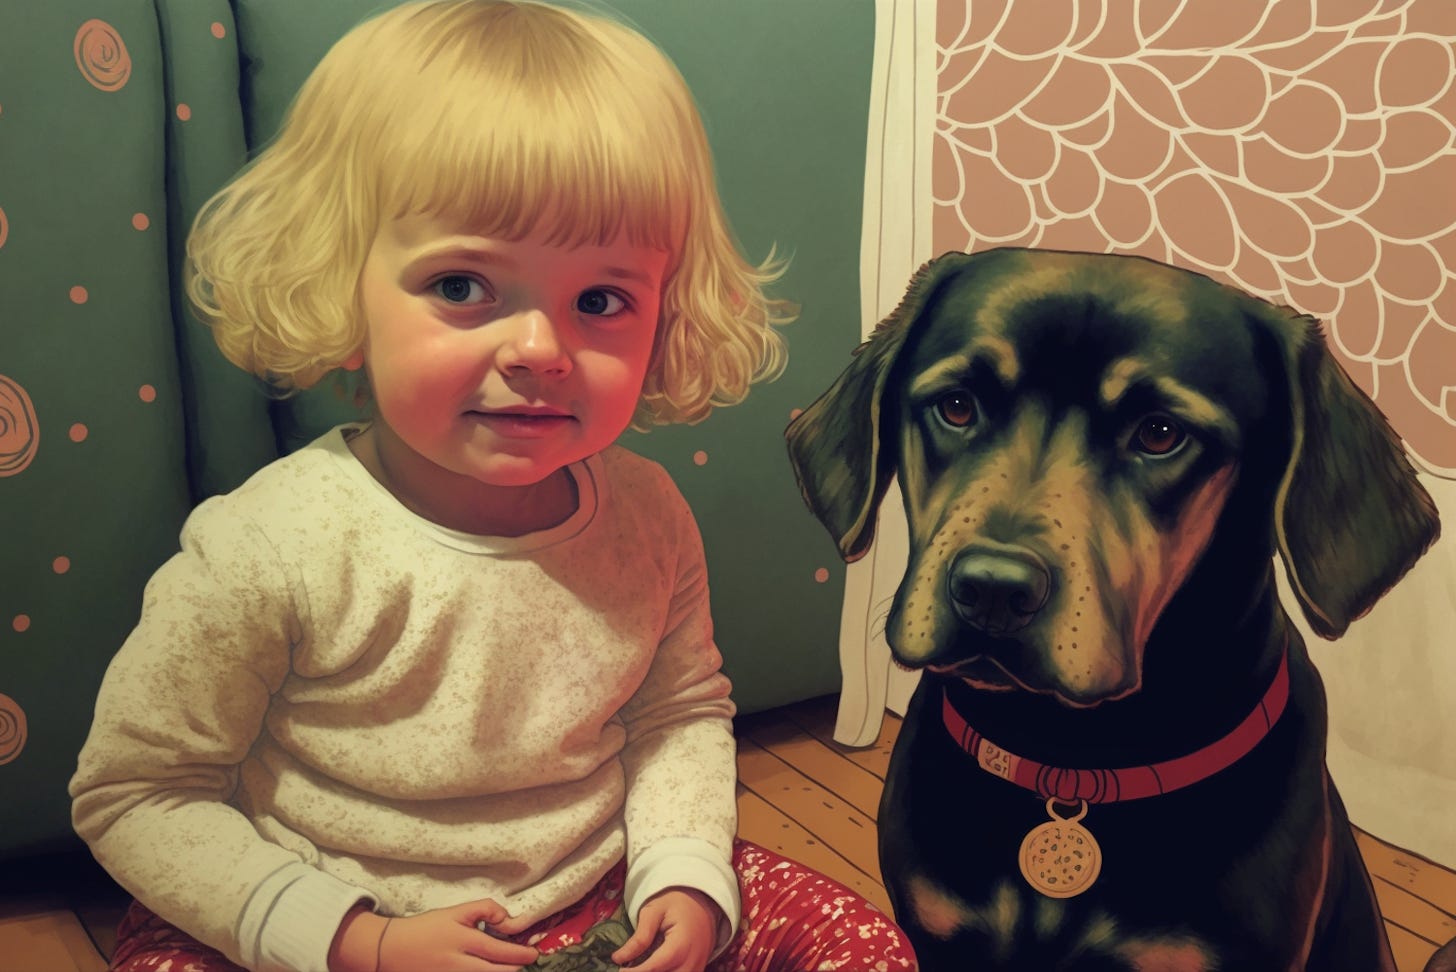 the most wonderful baby girl on this planet, and her dog